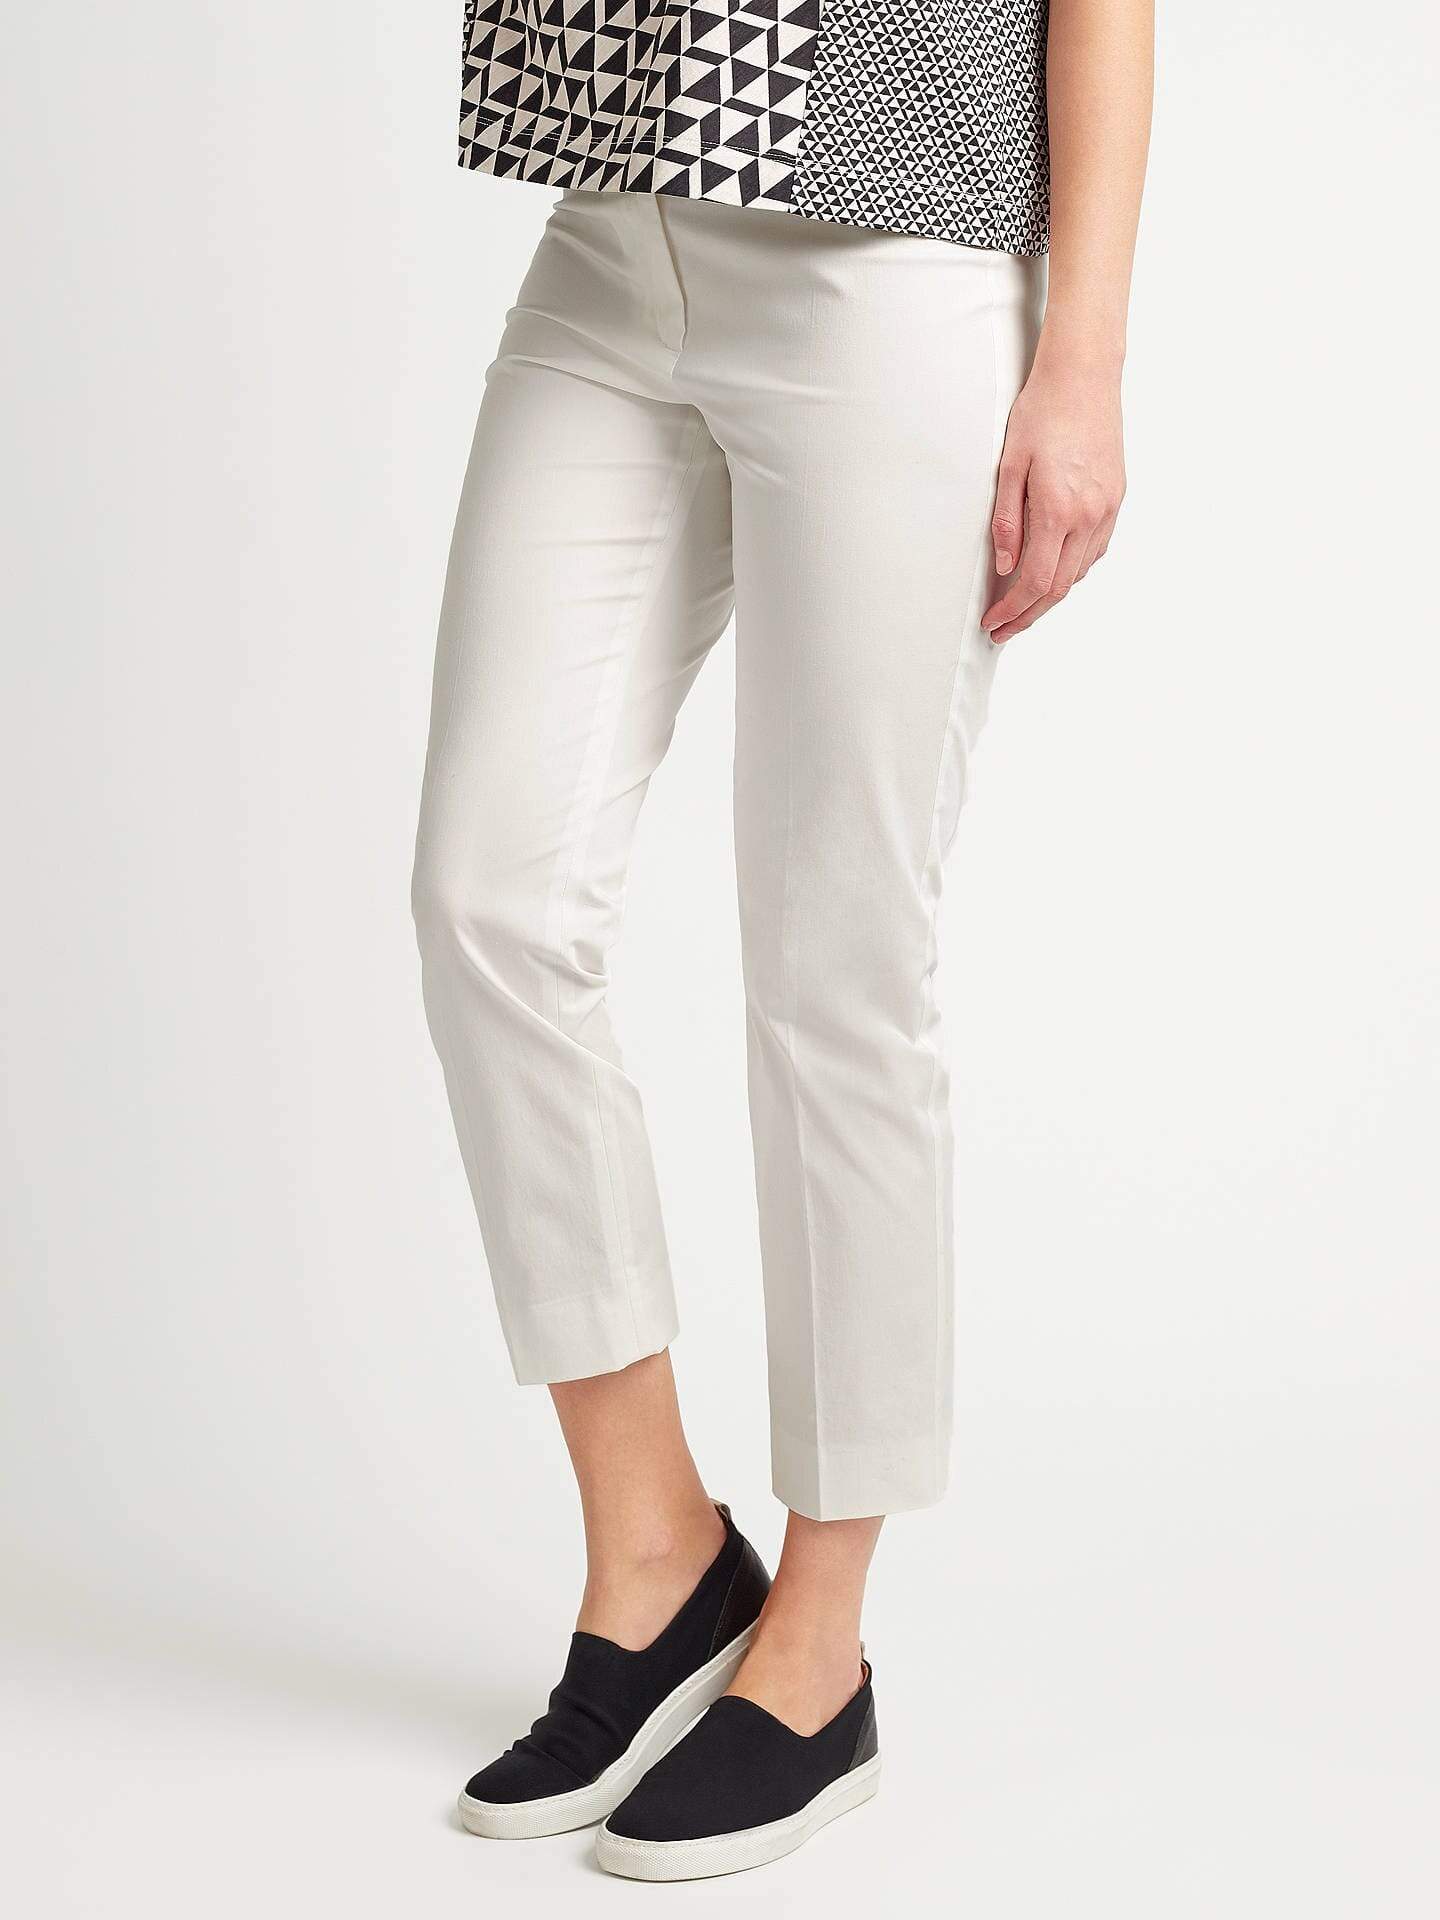 Trousers Leather Woman | Max Mara